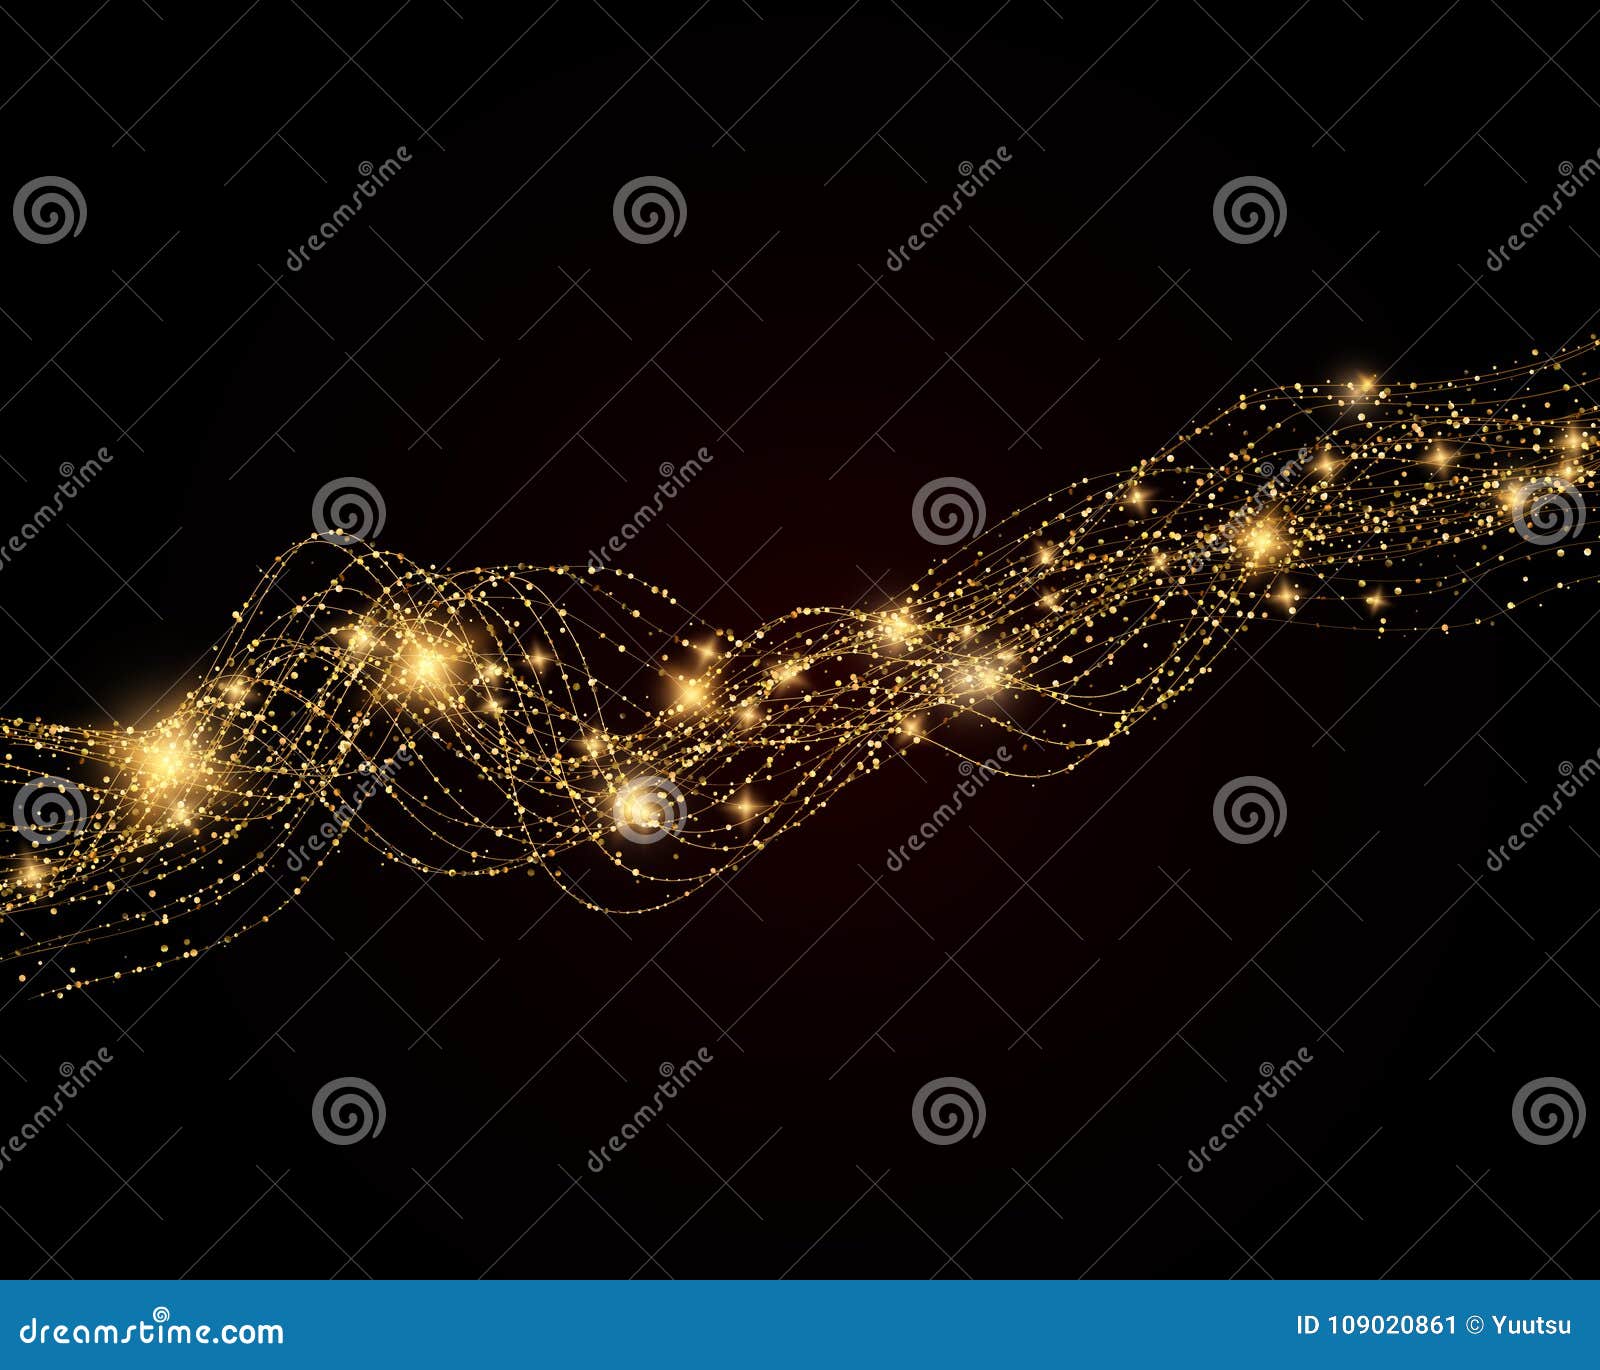 Vector Abstract Yellow Shiny Sparkling Golden Wavy Lines Stock Vector ...